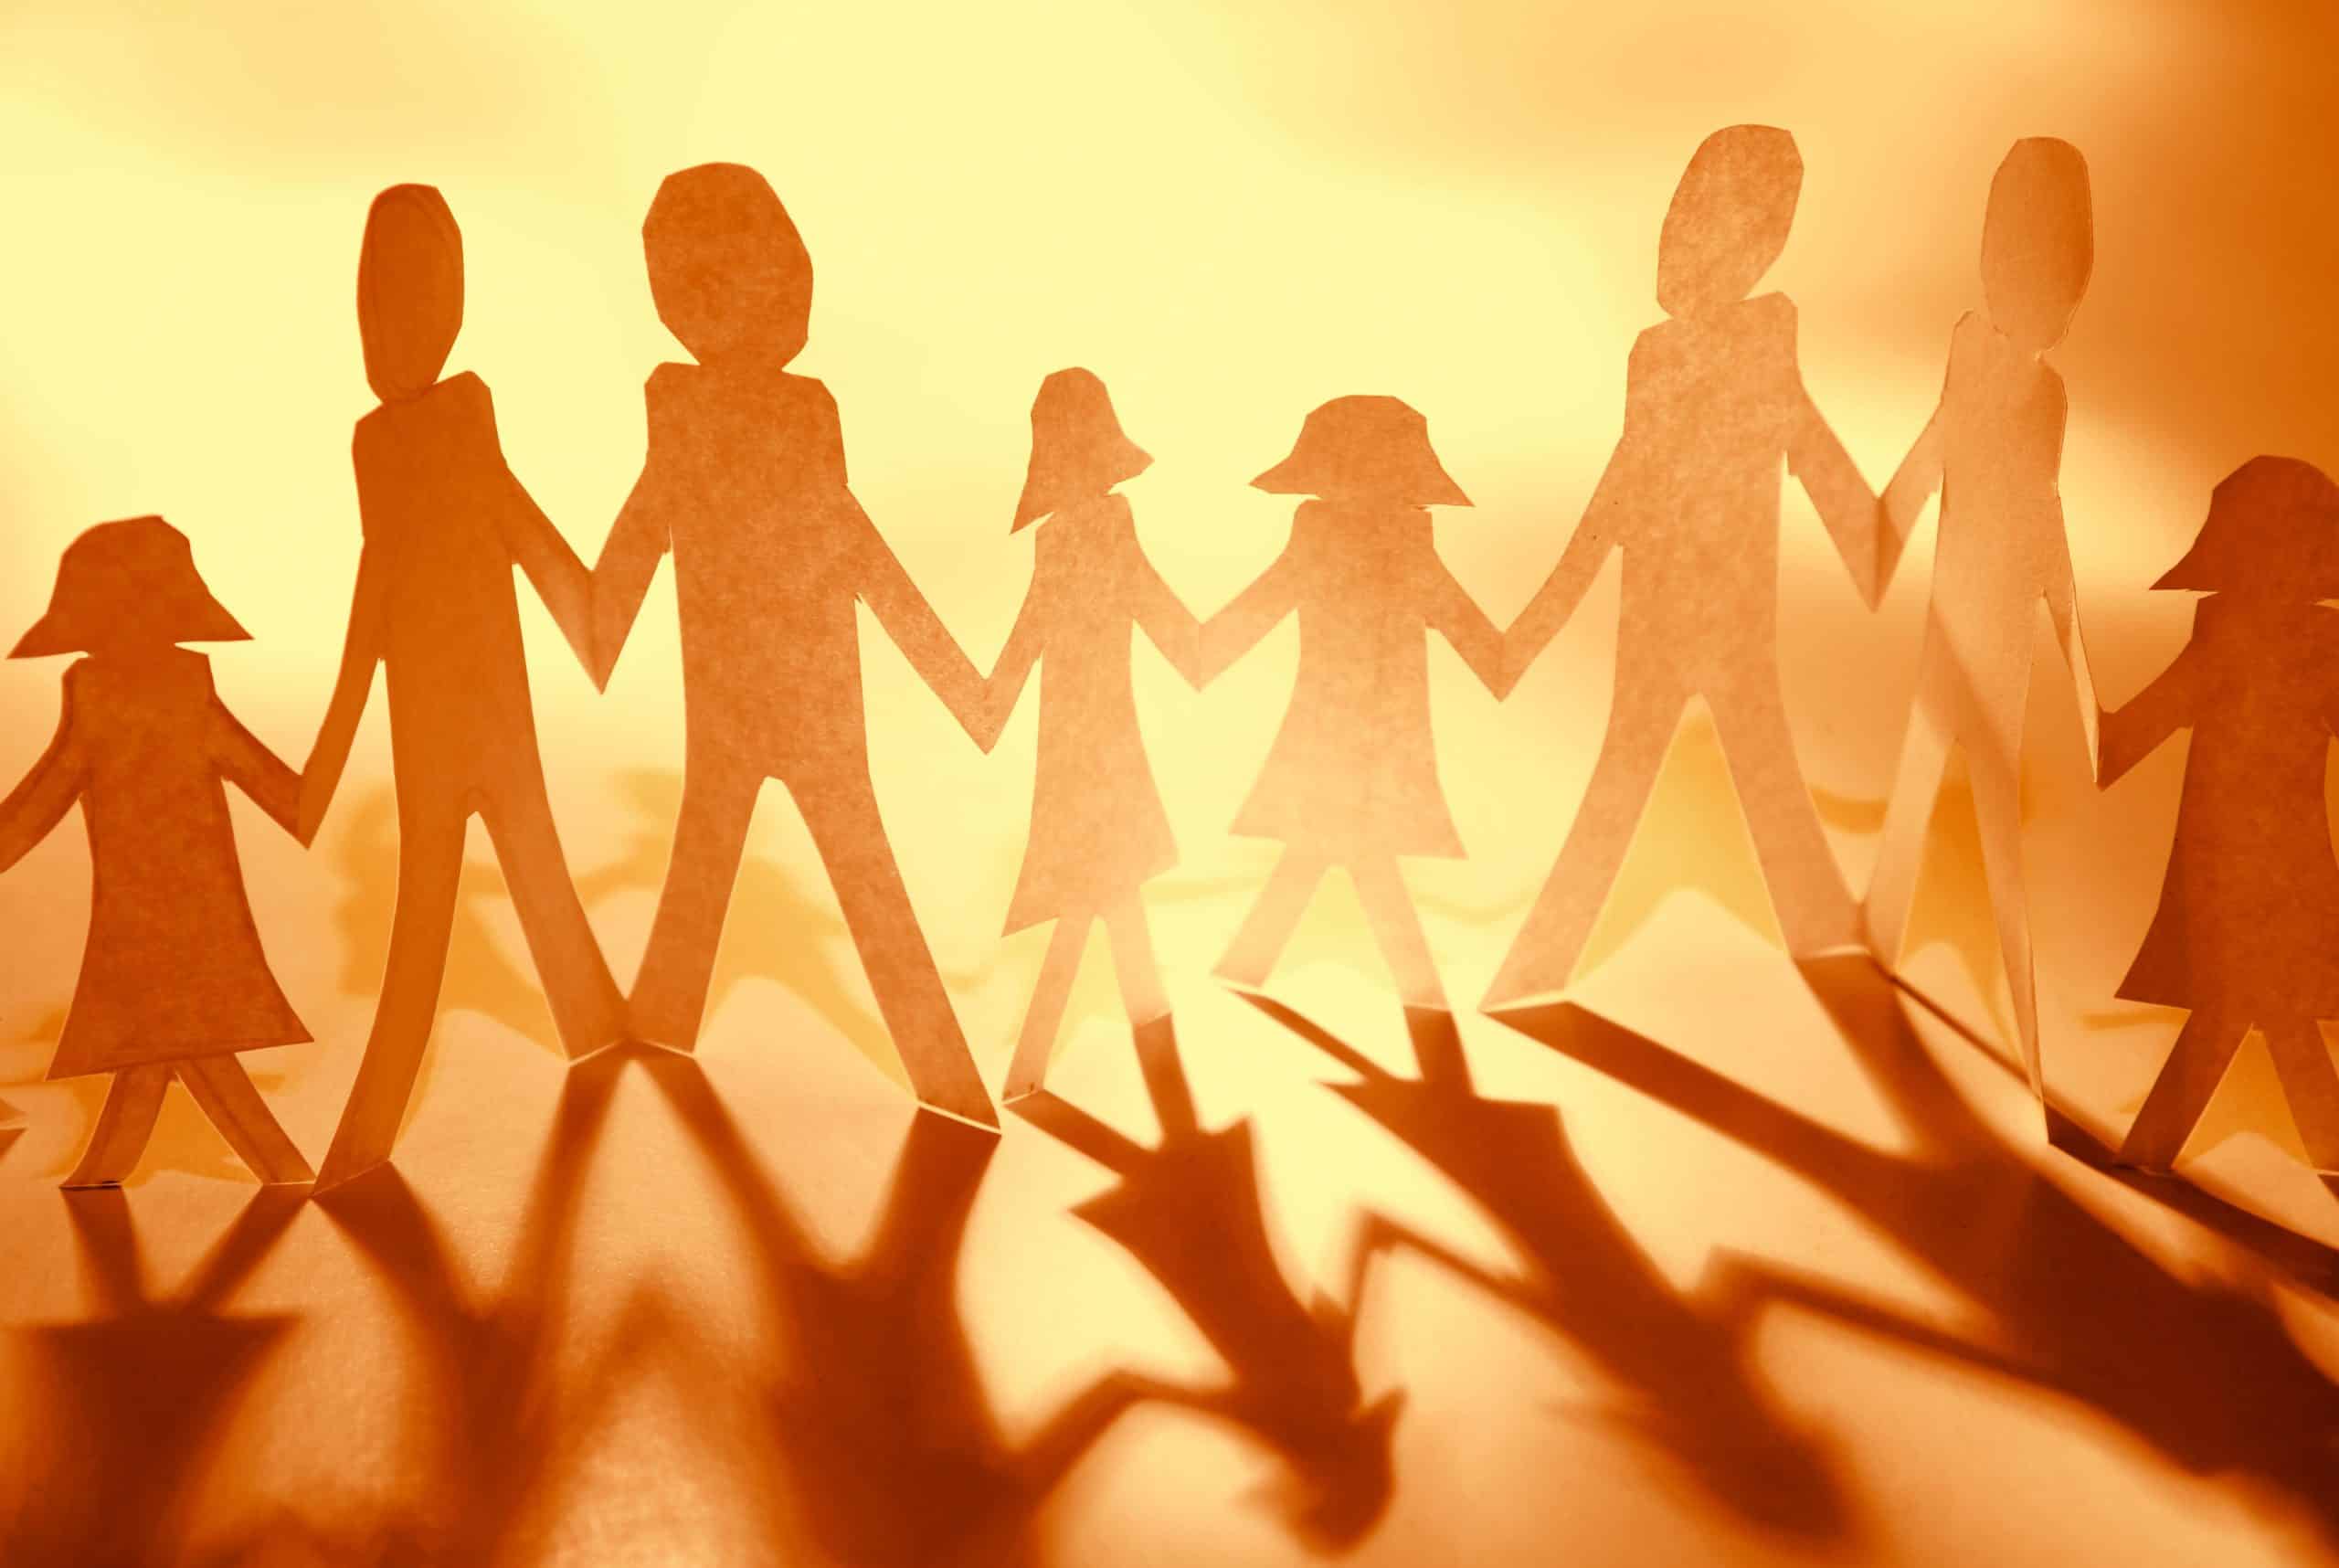 Photo of paper cut out of family figures with linking hands